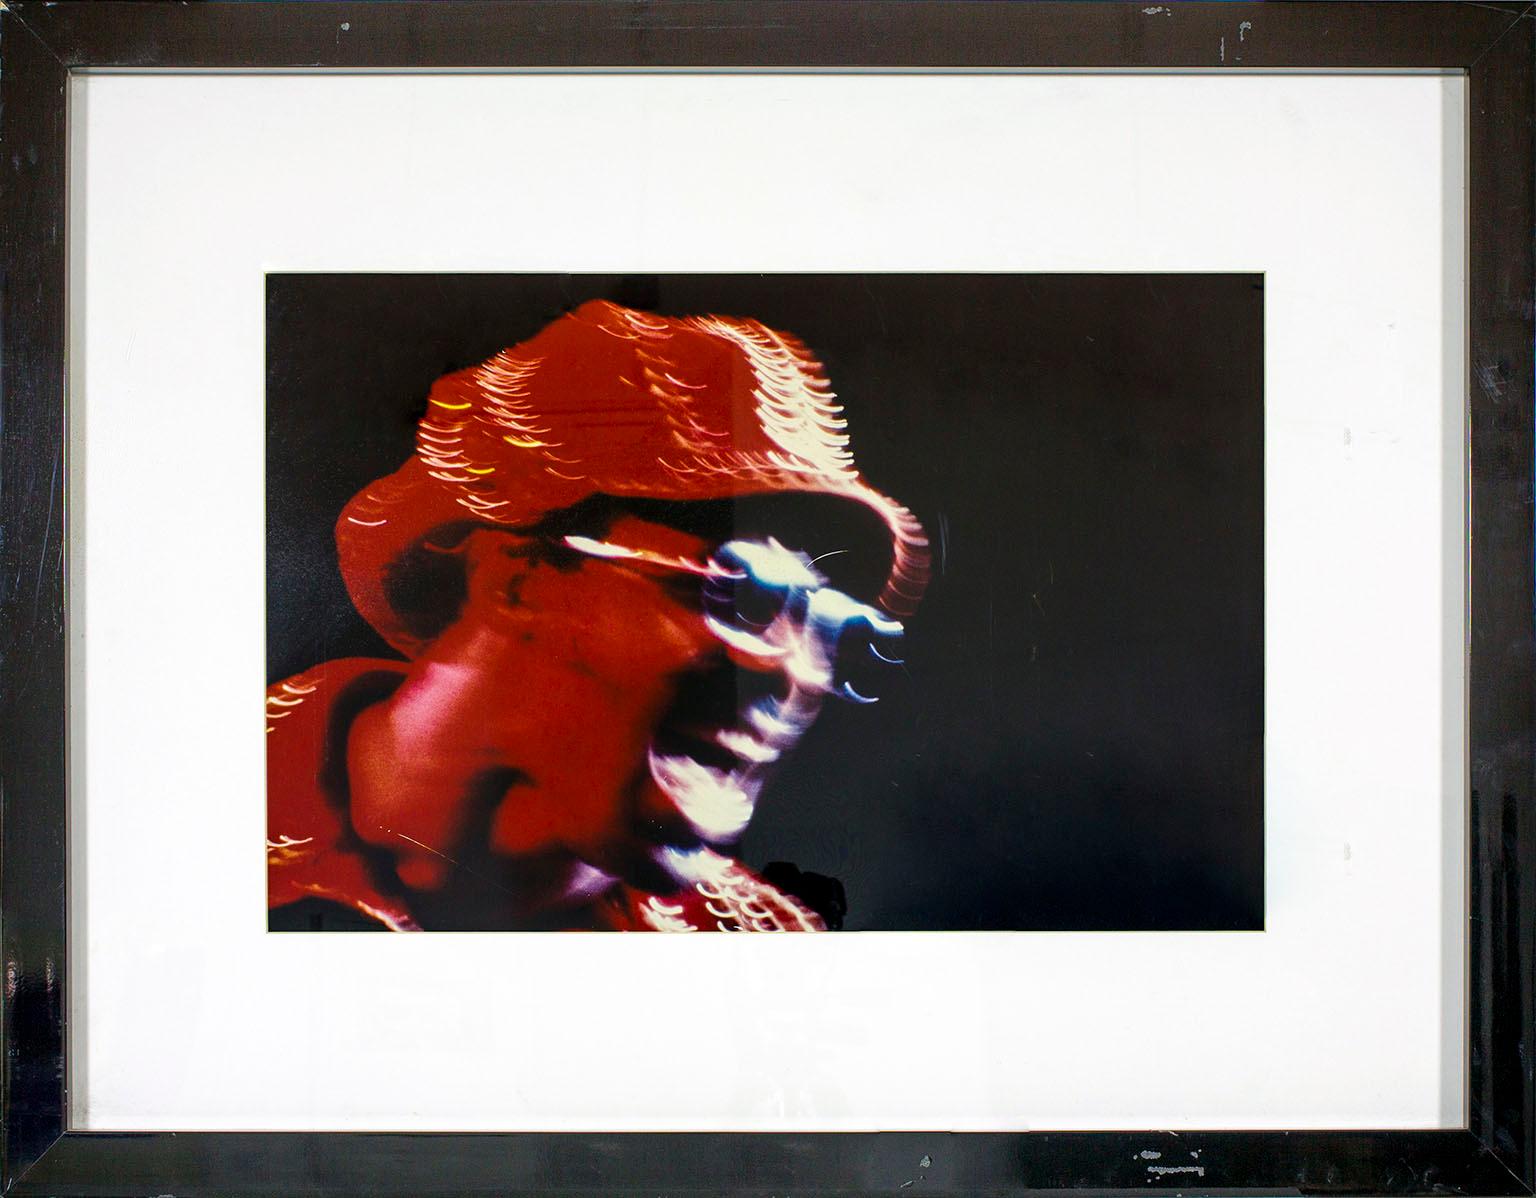 "Stevie Wonder'" framed color photograph by Jim Britt. This photograph was originally displayed in a guest room of the original Hard Rock Hotel and Casino in Las Vegas, Nevada, and comes with a certificate of authenticity and commemorative plaque to